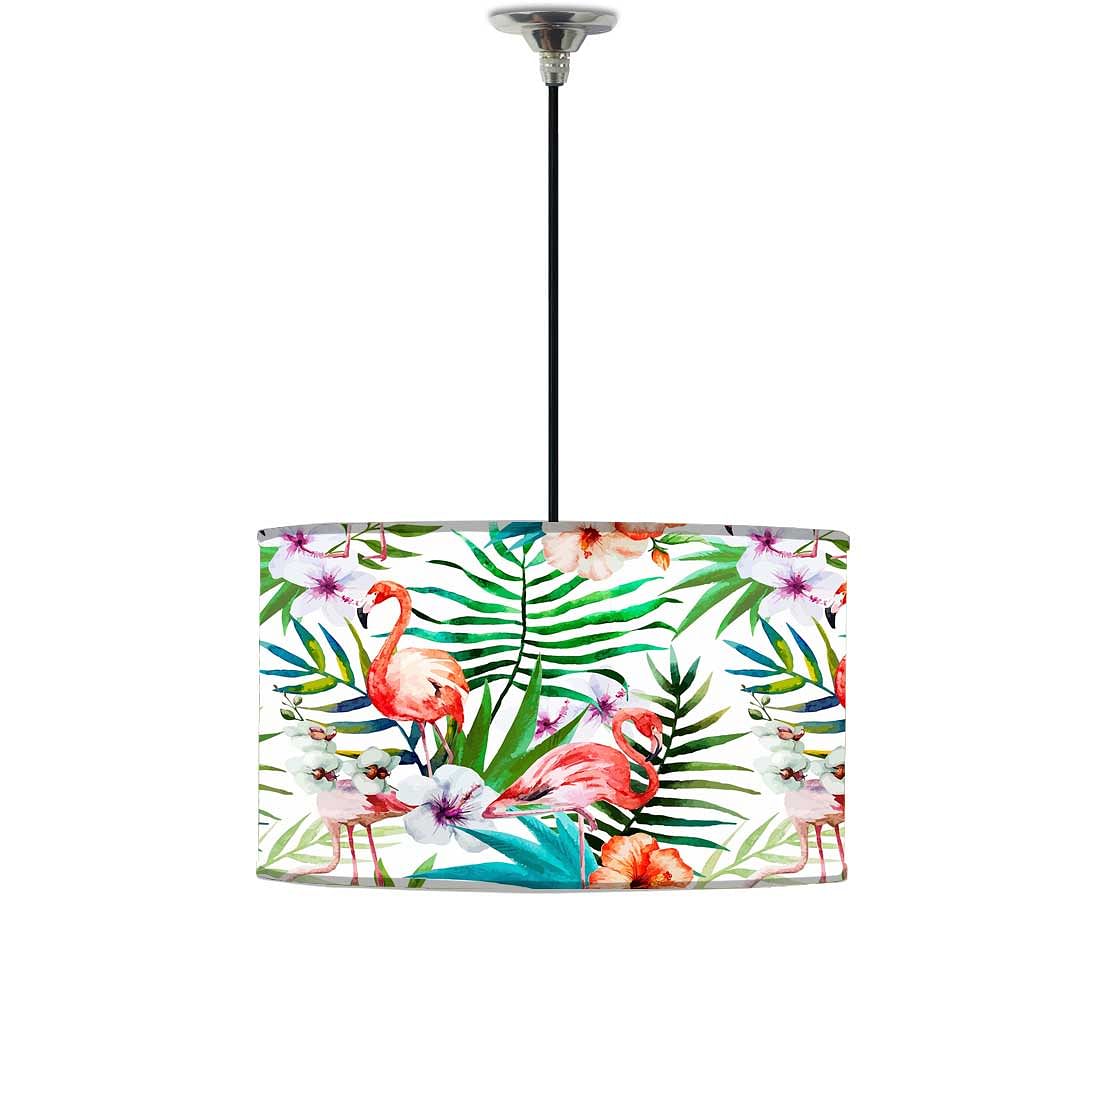 Drum Shade Hanging Lamps For Dining Room - 0012 Nutcase